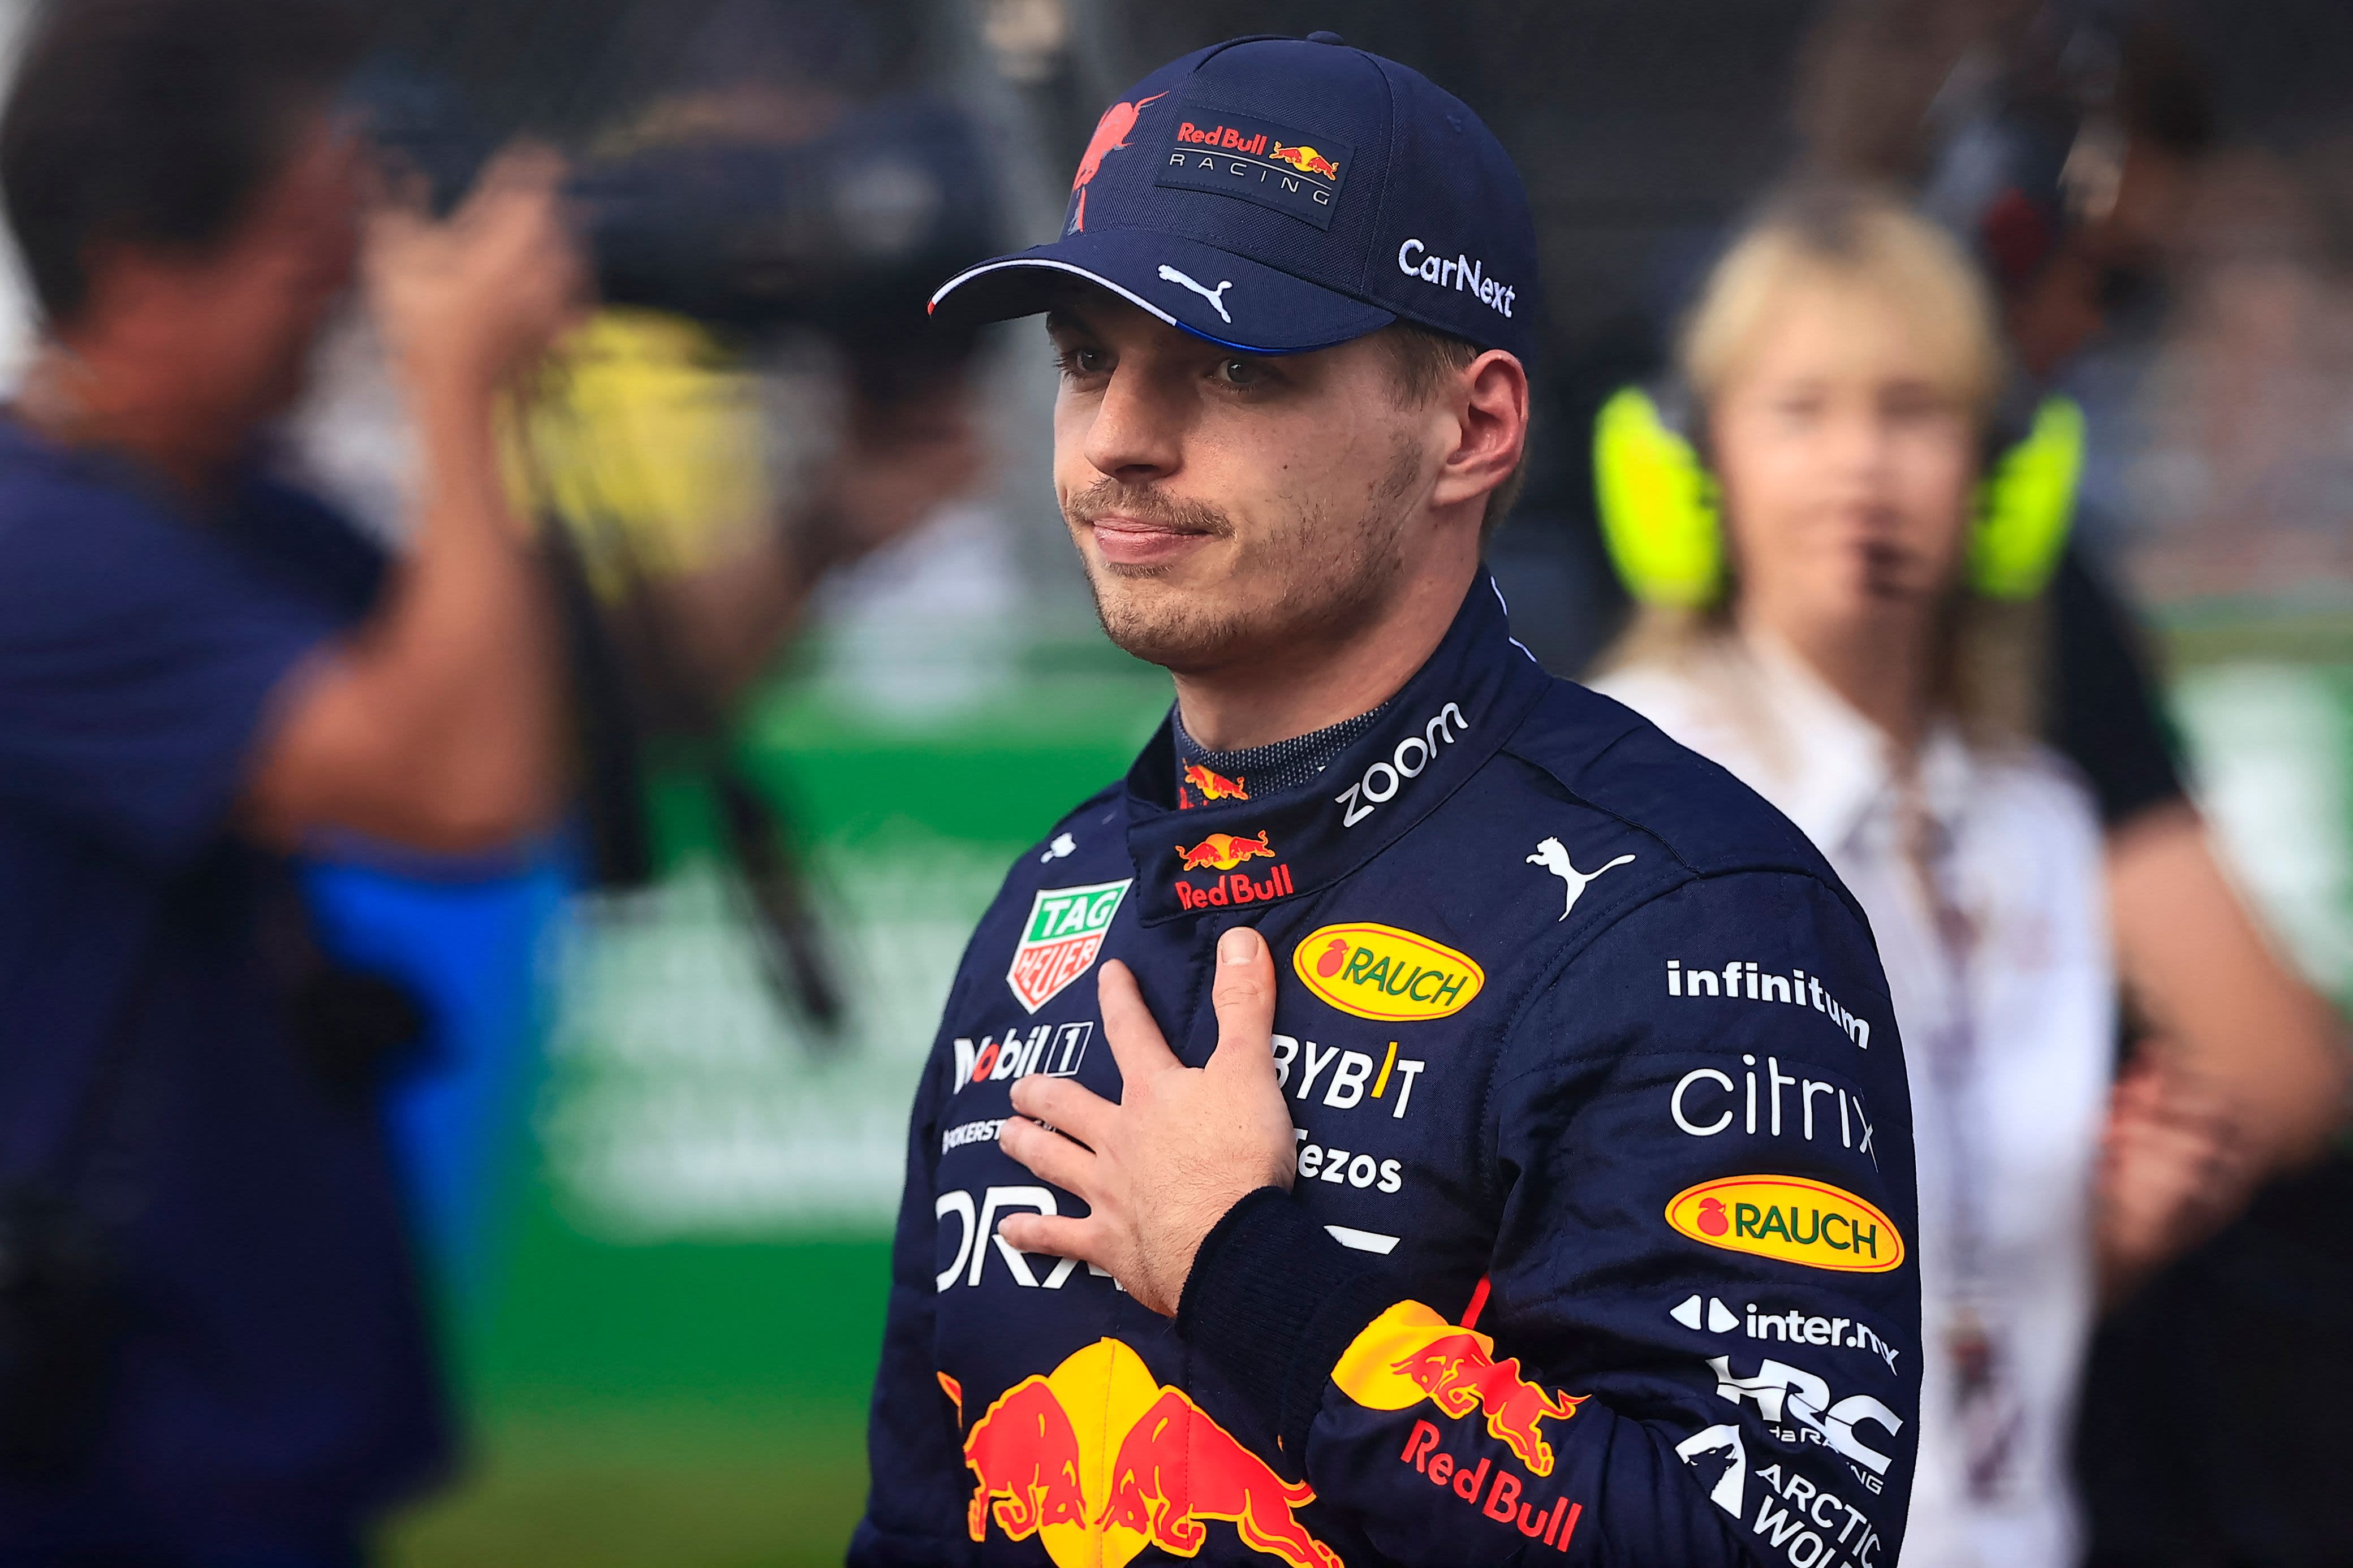 Ben depressief Van storm familie Max Verstappen angry at 'disrespectful' comments as Red Bull snubs Sky  Sports | CNN